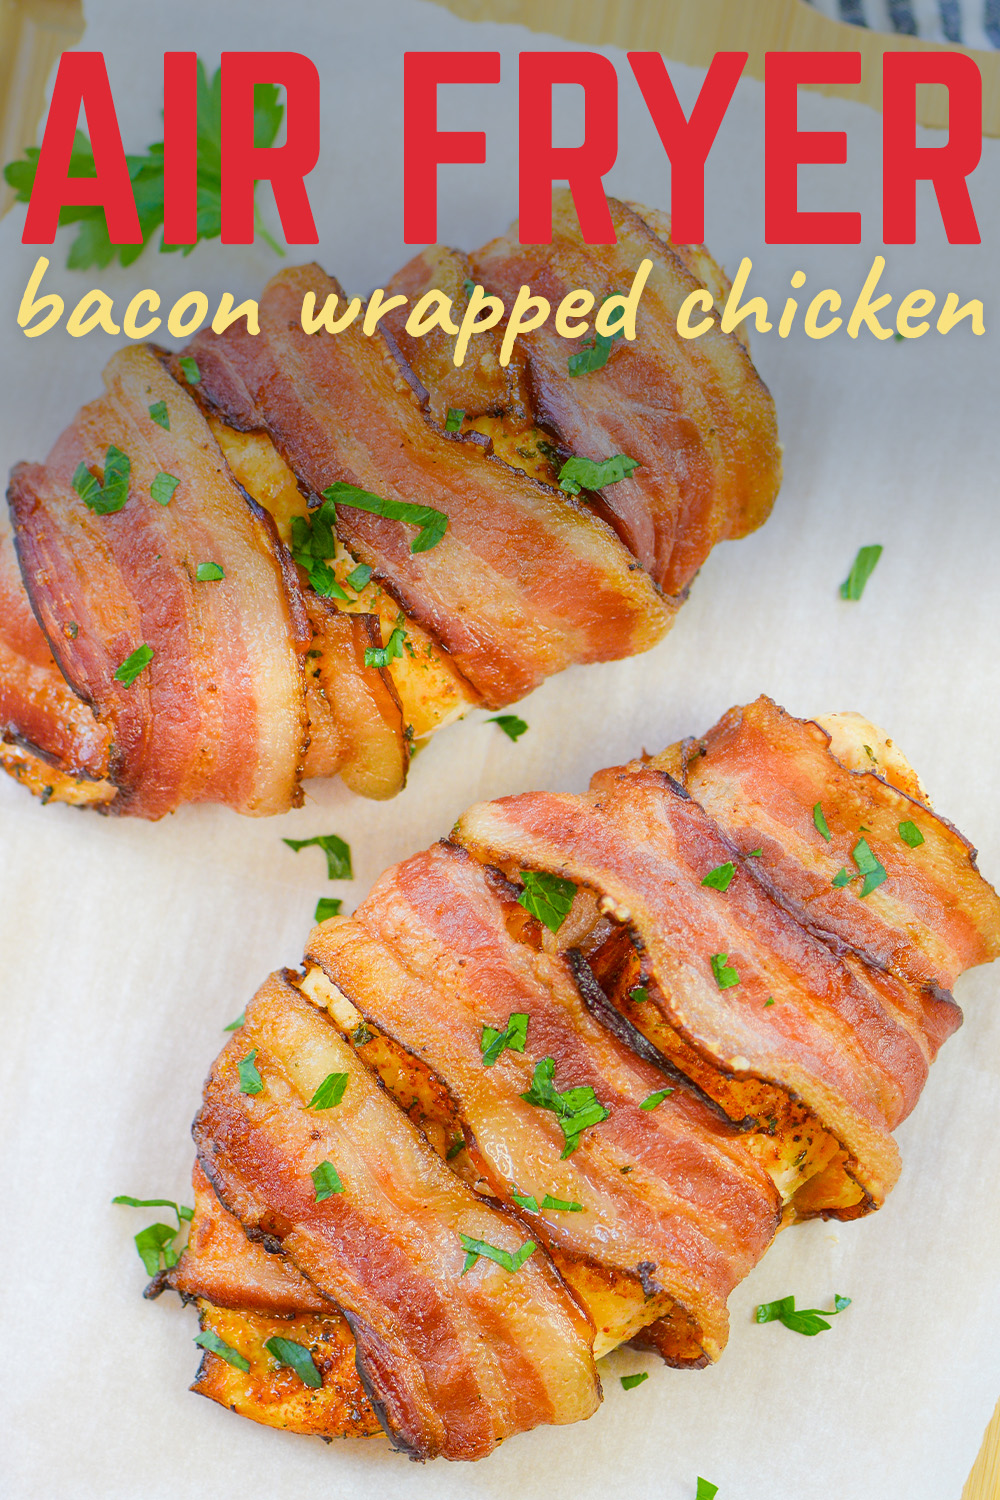 This bacon wrapped chicken tastes so amazing it is almost fine dining!